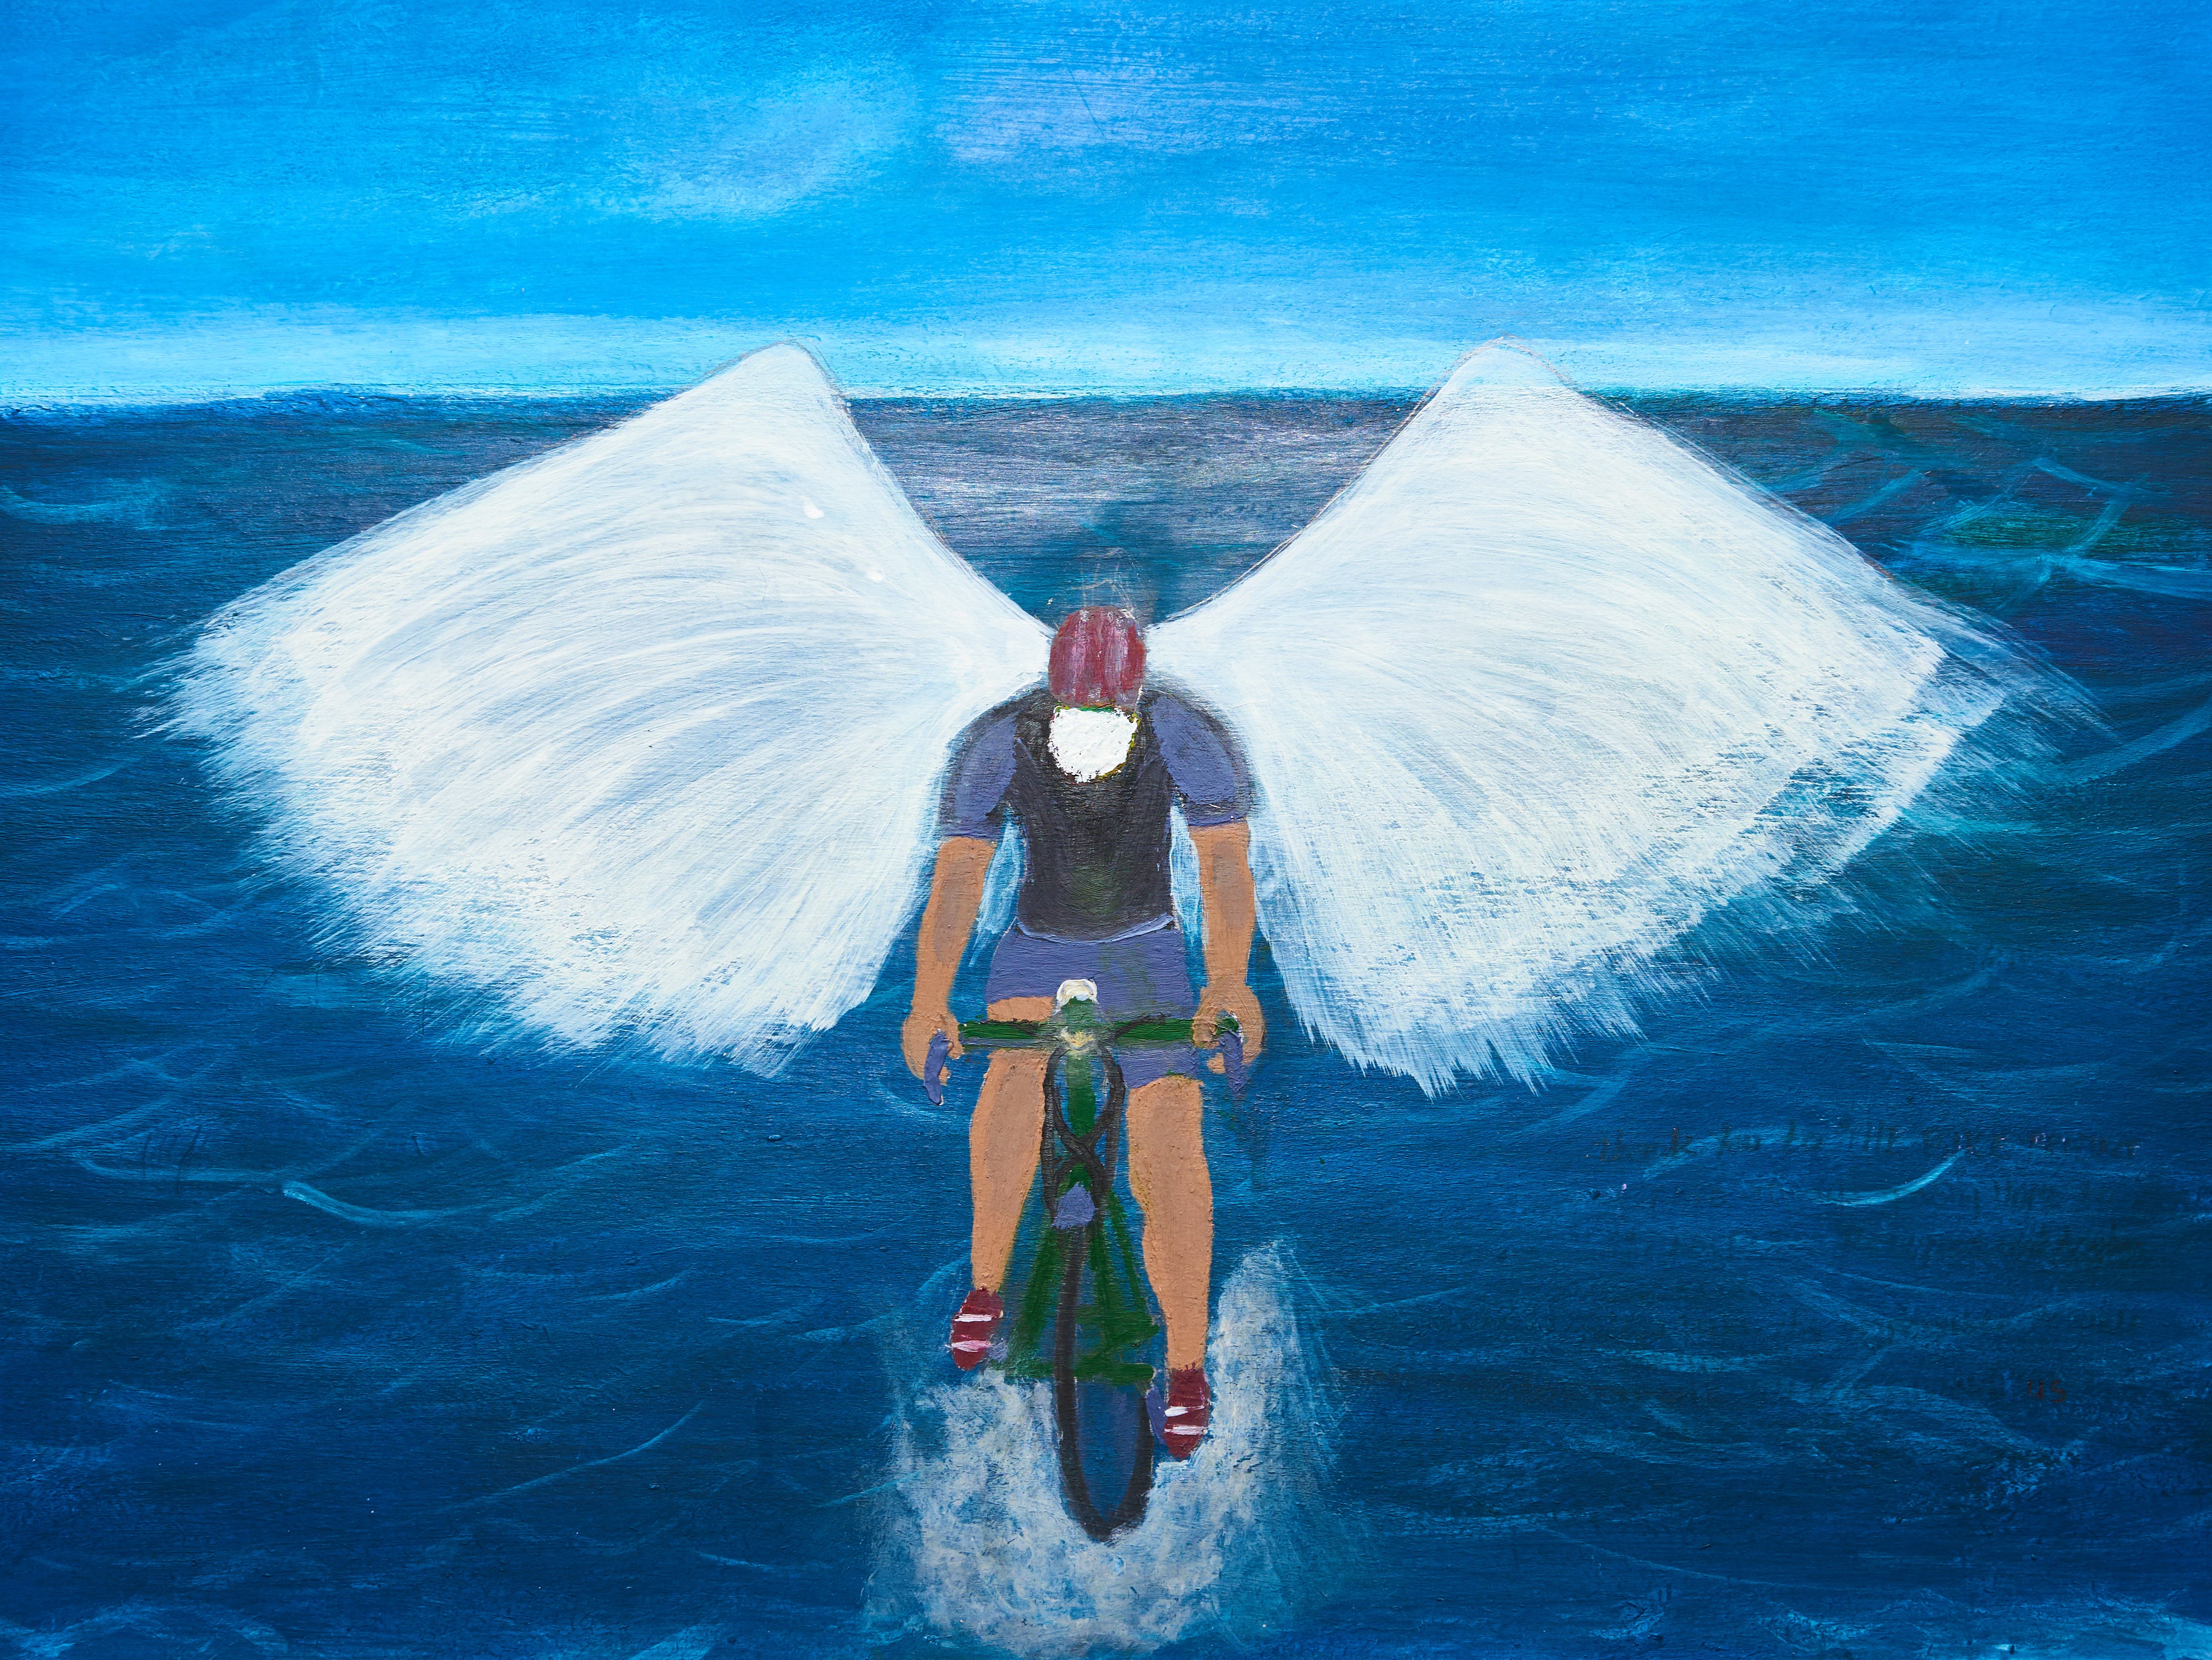 A painting by Comfort Adeyemi, who says cycling transformed her life